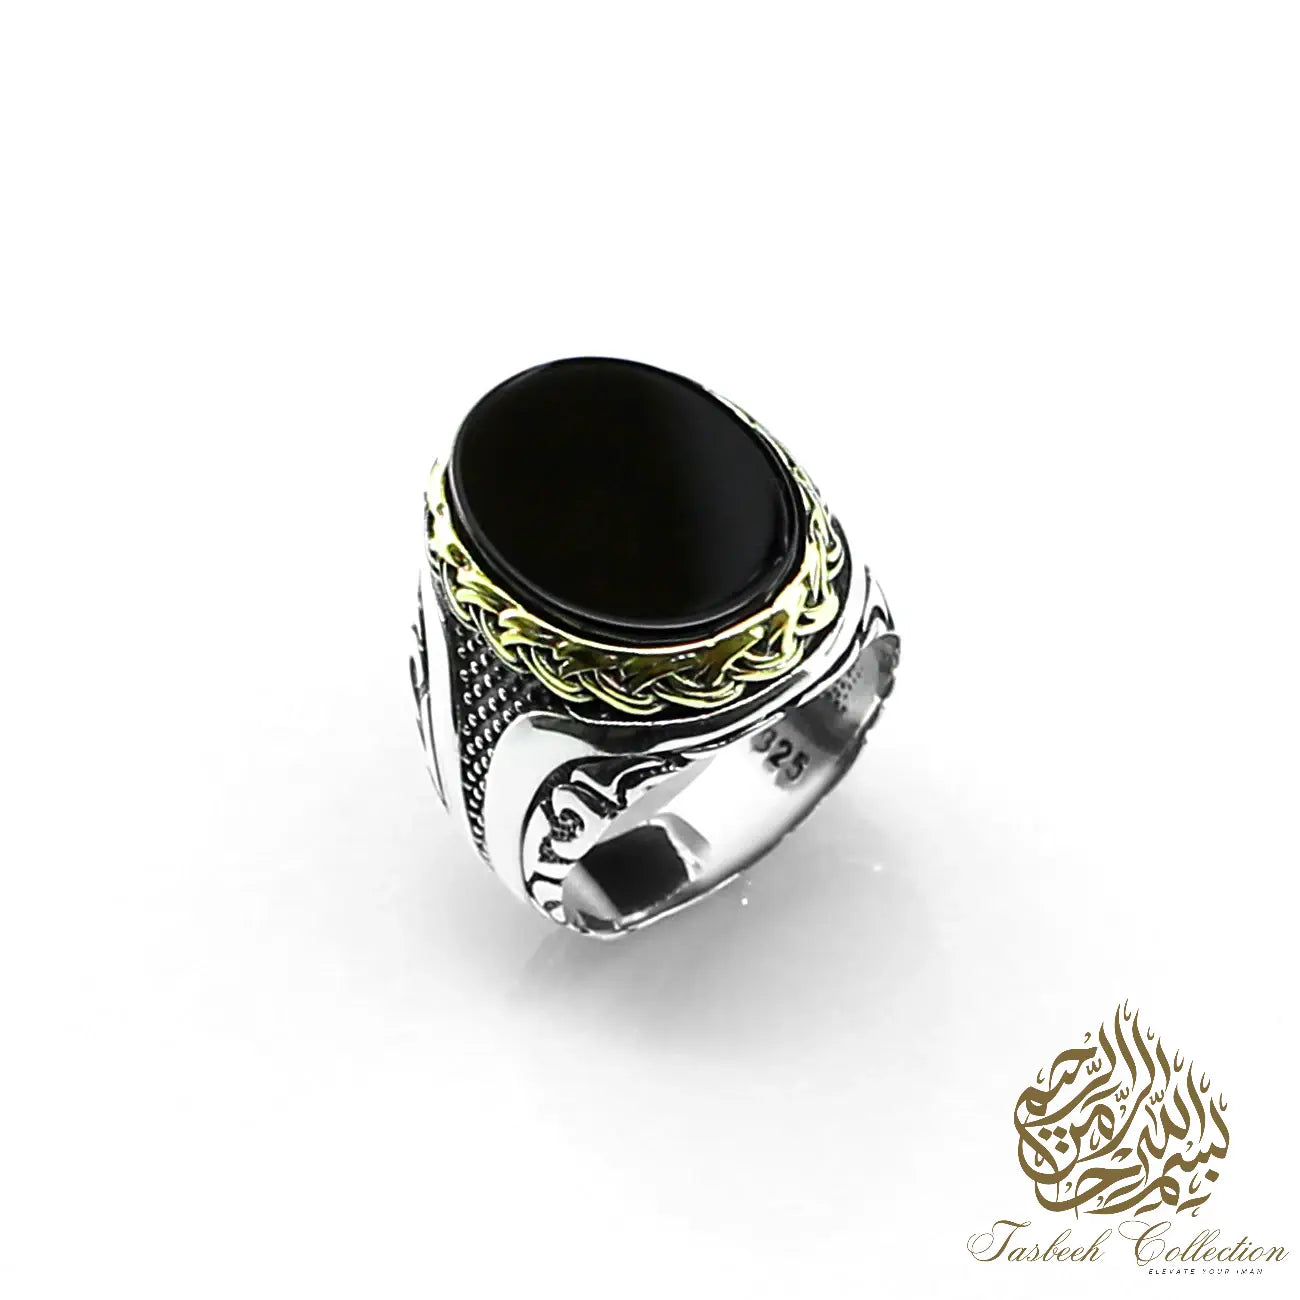 Hand Made 925 Carat Sterling Silver Ring with Choice of Tiger Eye, Black Onyx, Green or Red Agate